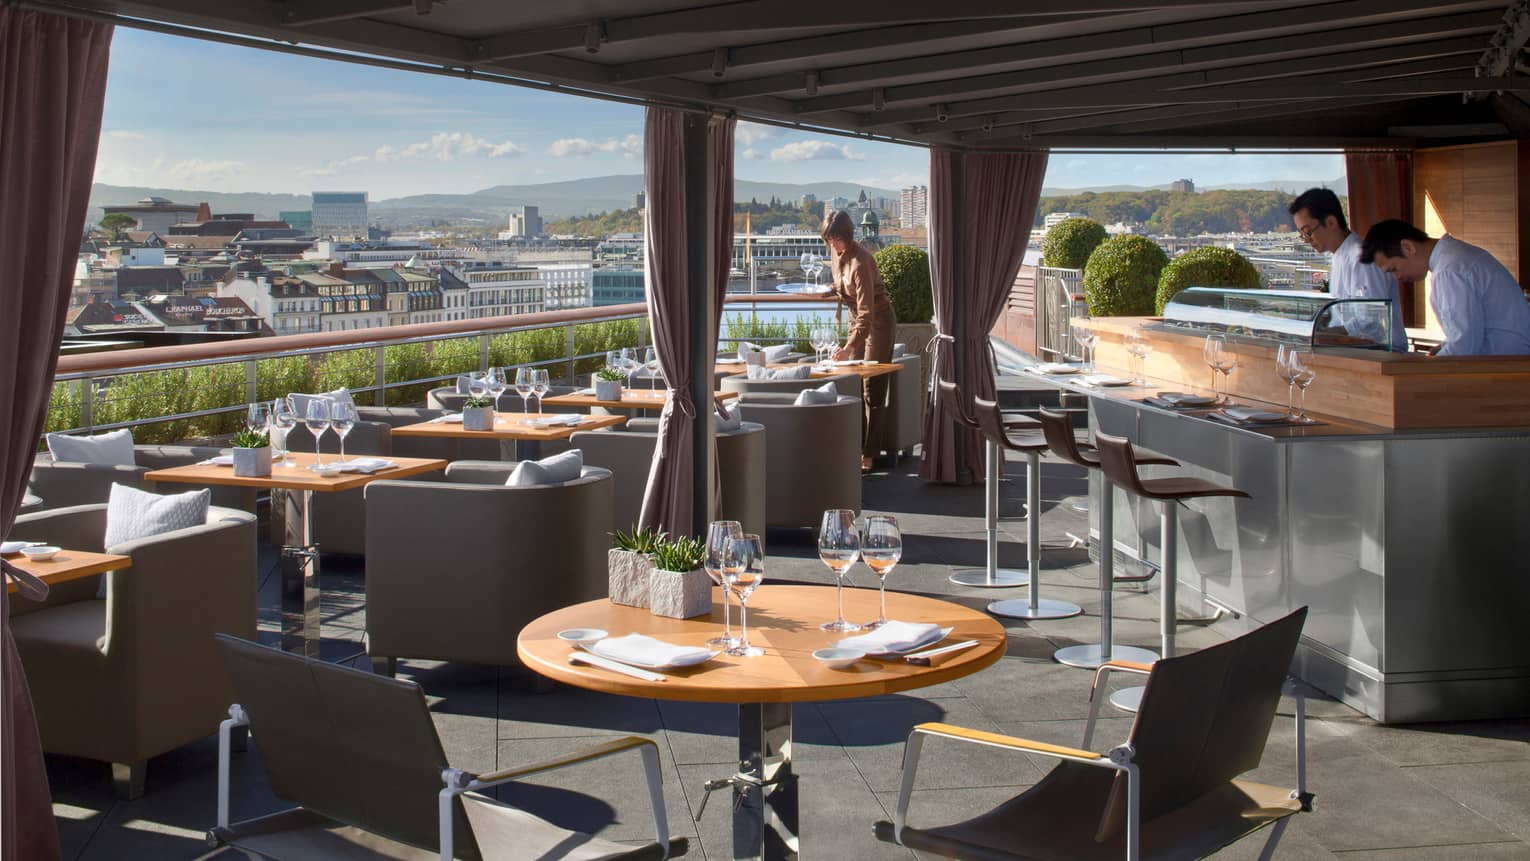 Feast on 360˚ rooftop patio dining tables and chairs under awning on sunny day, bartenders and server sets table